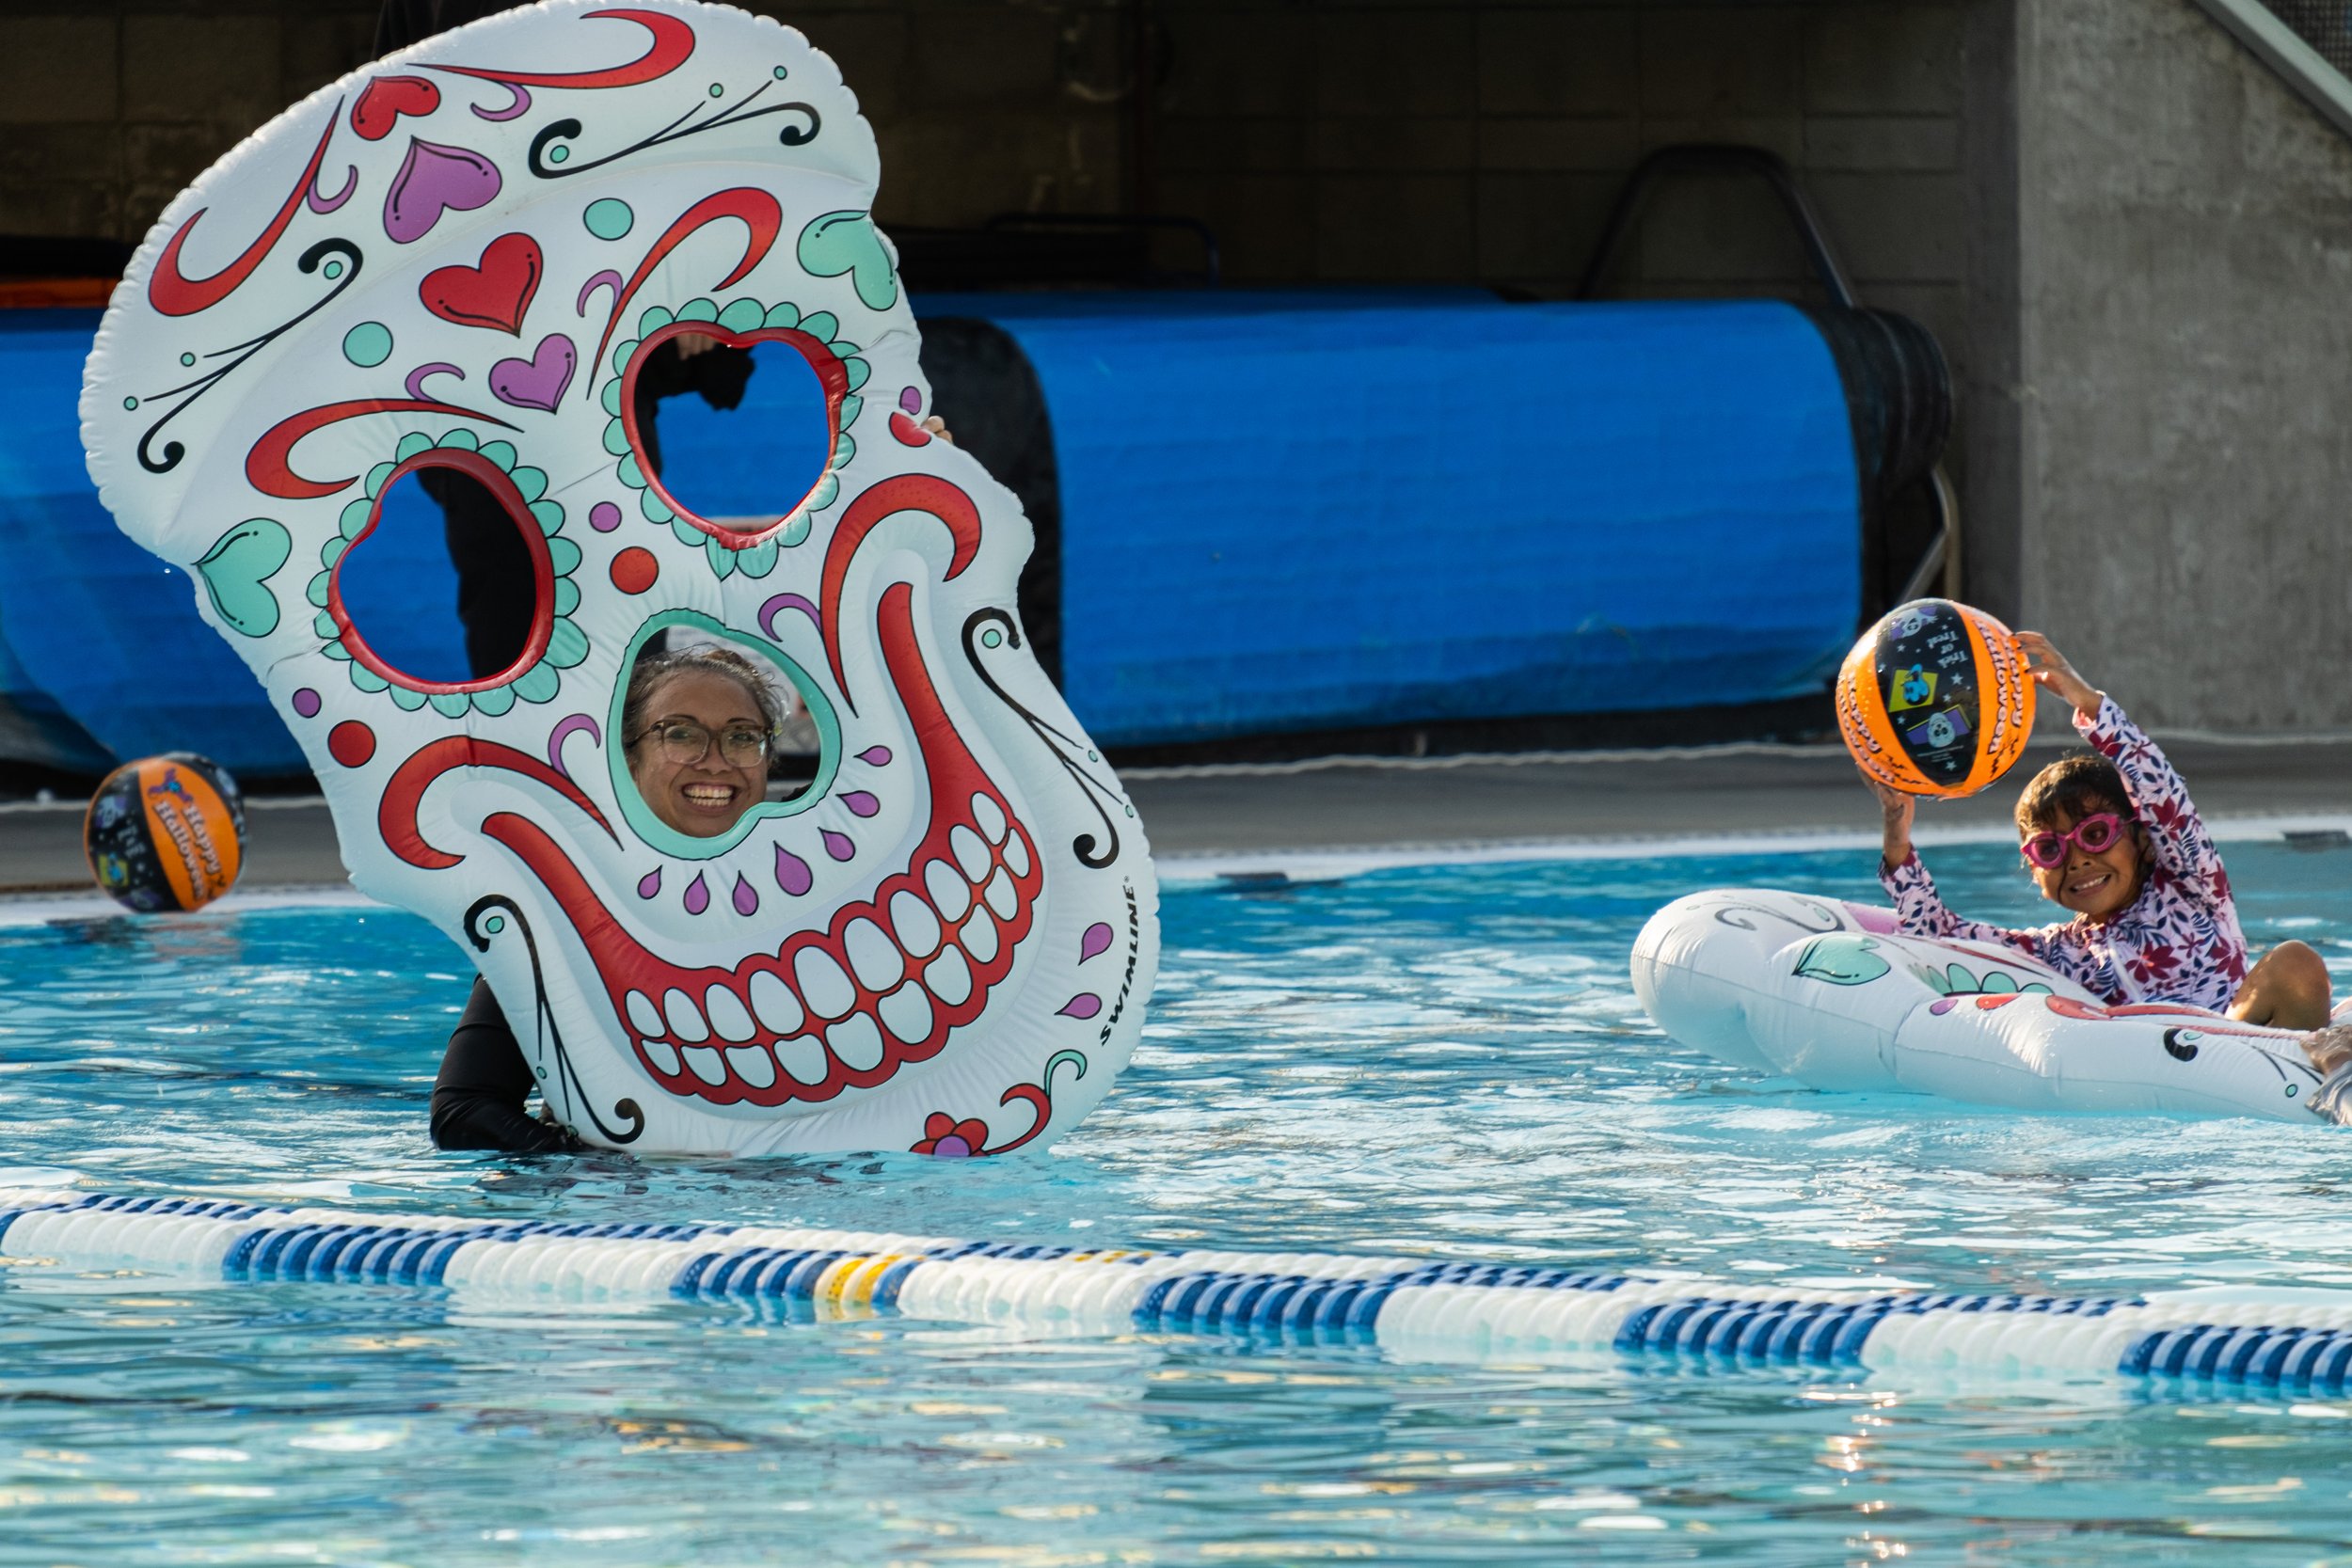  On Friday, October 27th, the Santa Monica Swim Center held their Halloween Spooky Splash Spectacular. Children of all ages splashed in the Floating Pumpkin Patch in Santa Monica, Calif. (Akemi Rico | The Corsair) 